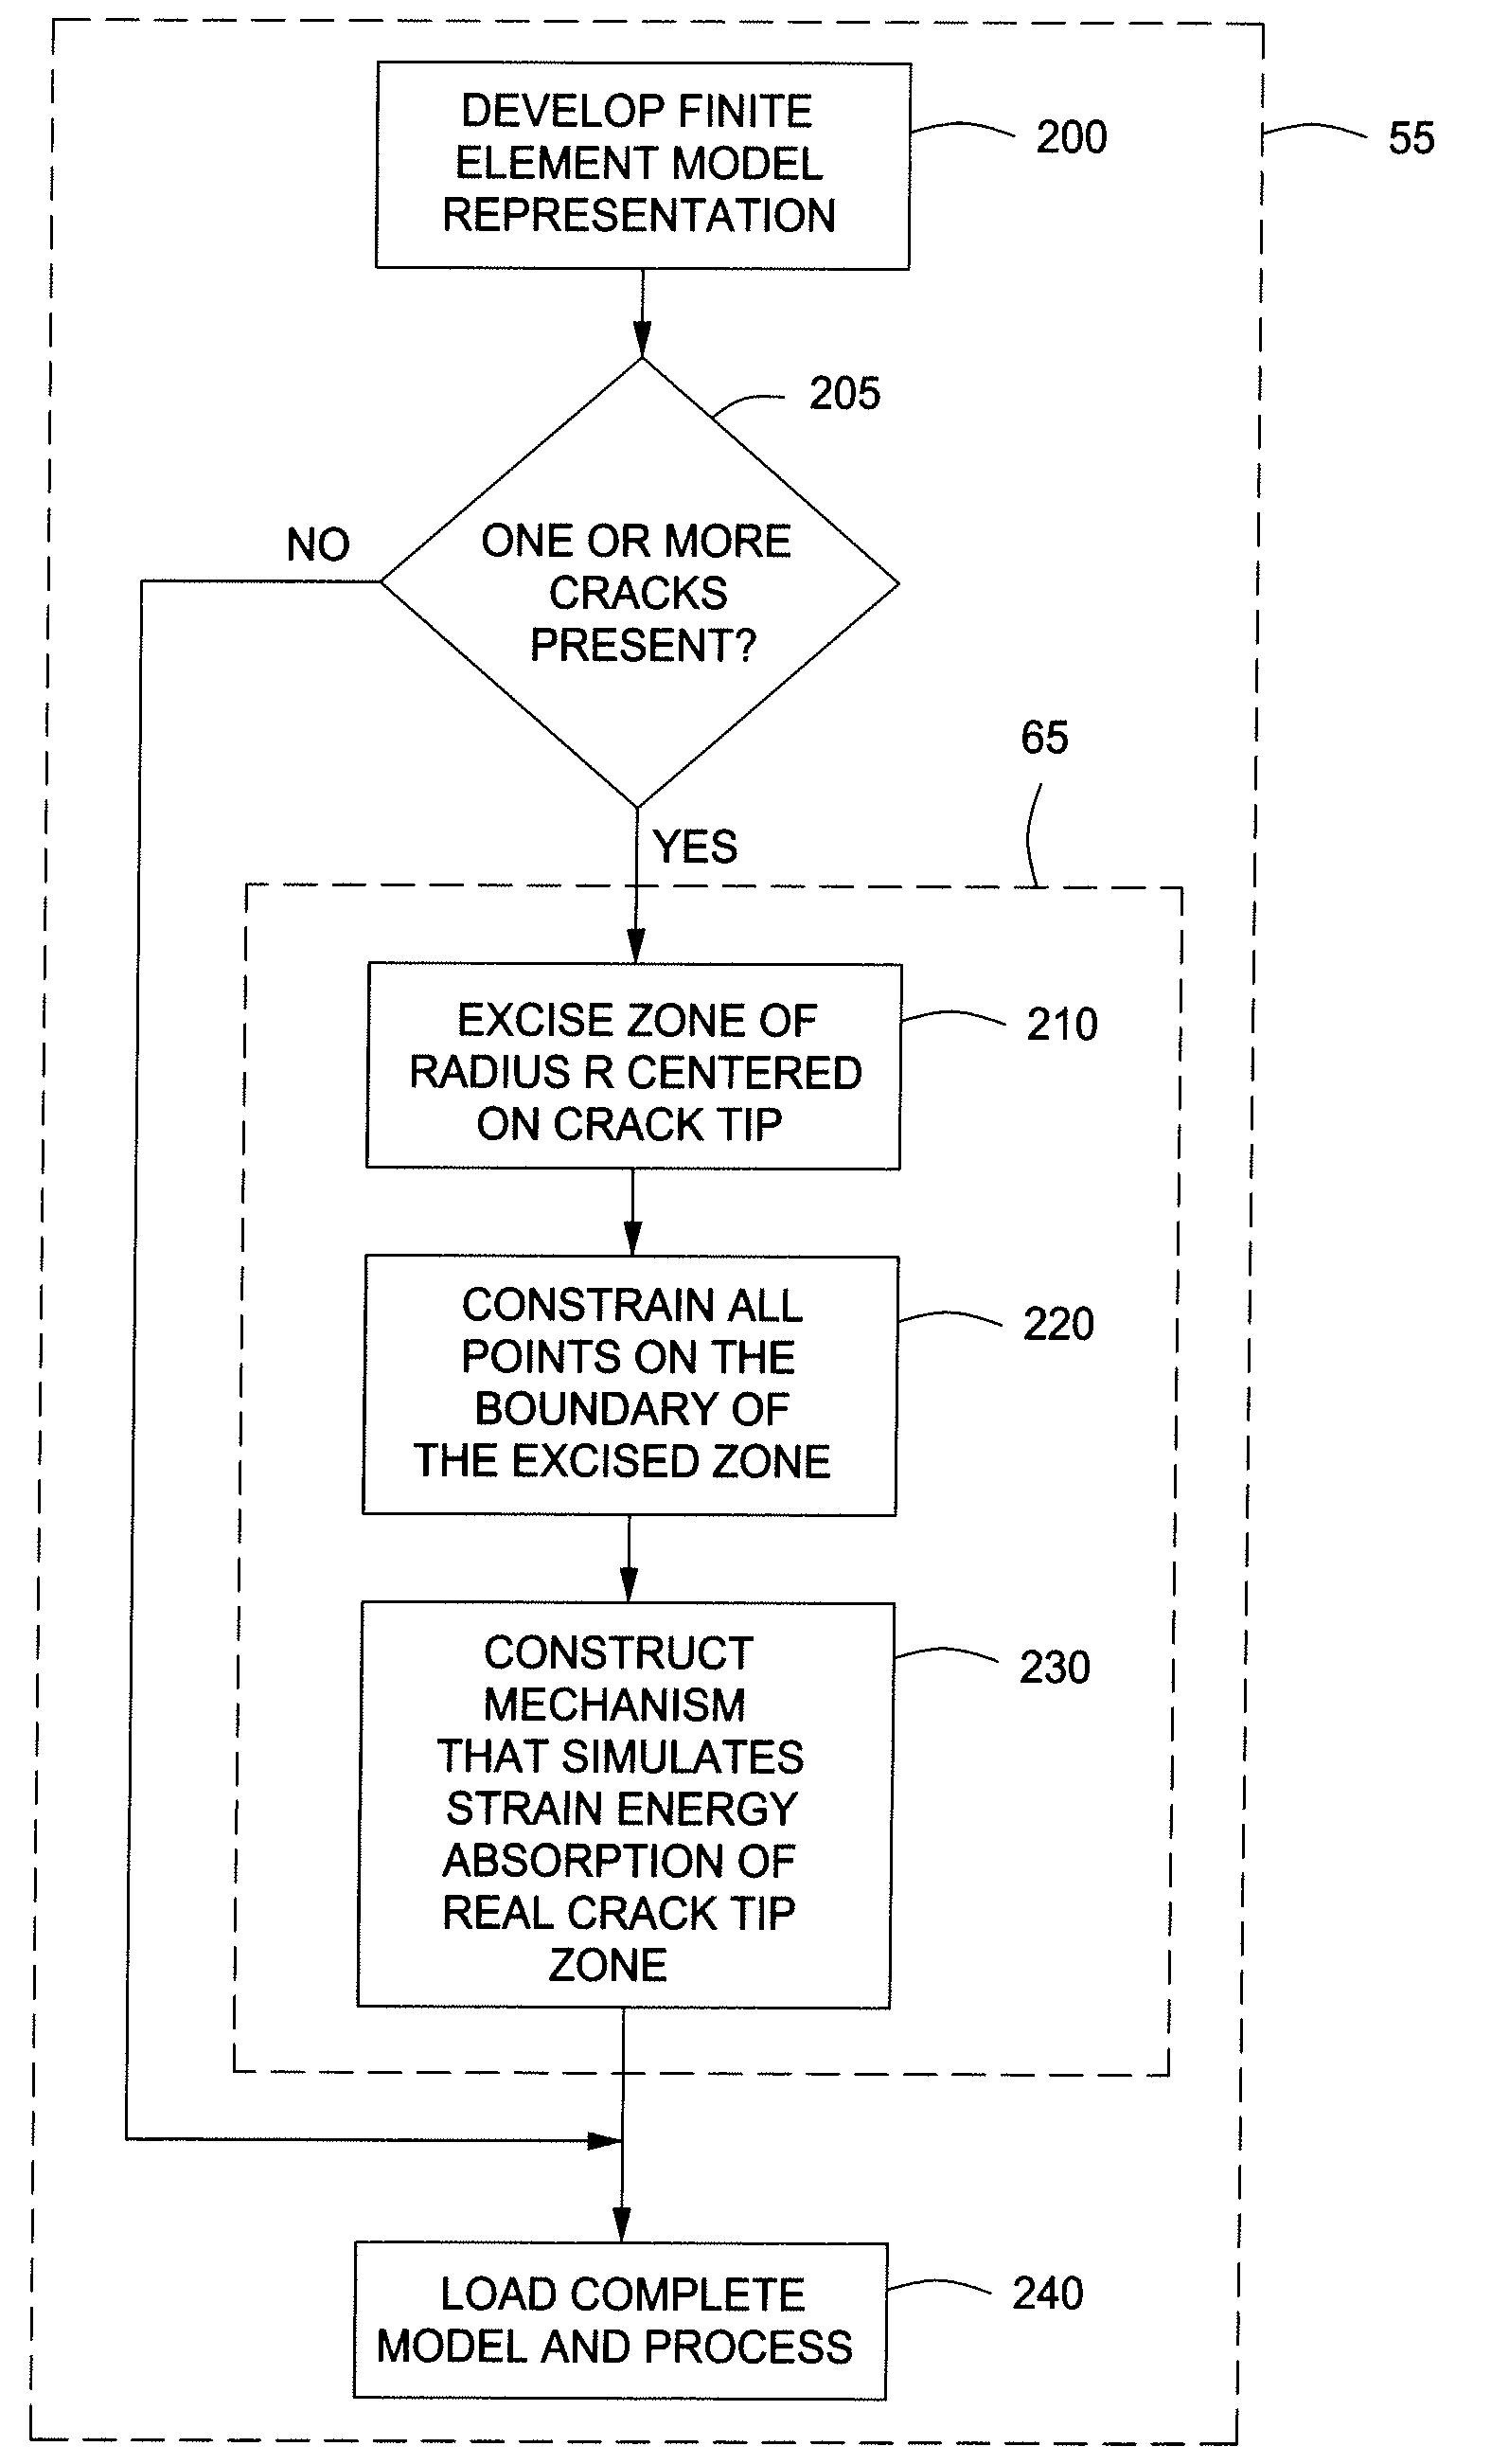 Systems and Methods for Performing Stress Intensity Factor Calculations Using Non-Singluar Finite Elements